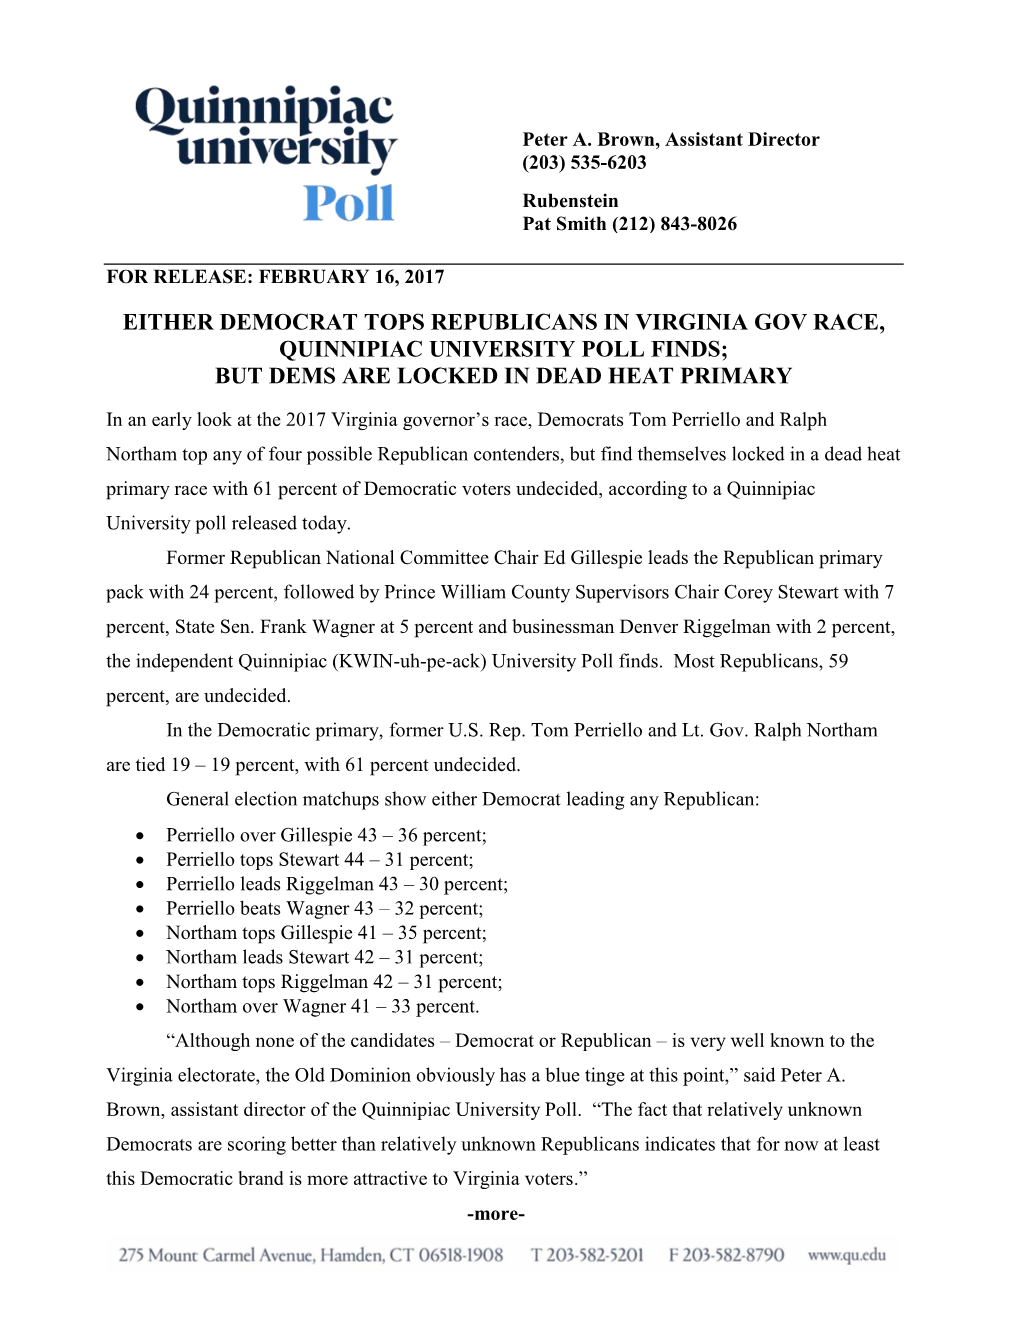 Either Democrat Tops Republicans in Virginia Gov Race, Quinnipiac University Poll Finds; but Dems Are Locked in Dead Heat Primary